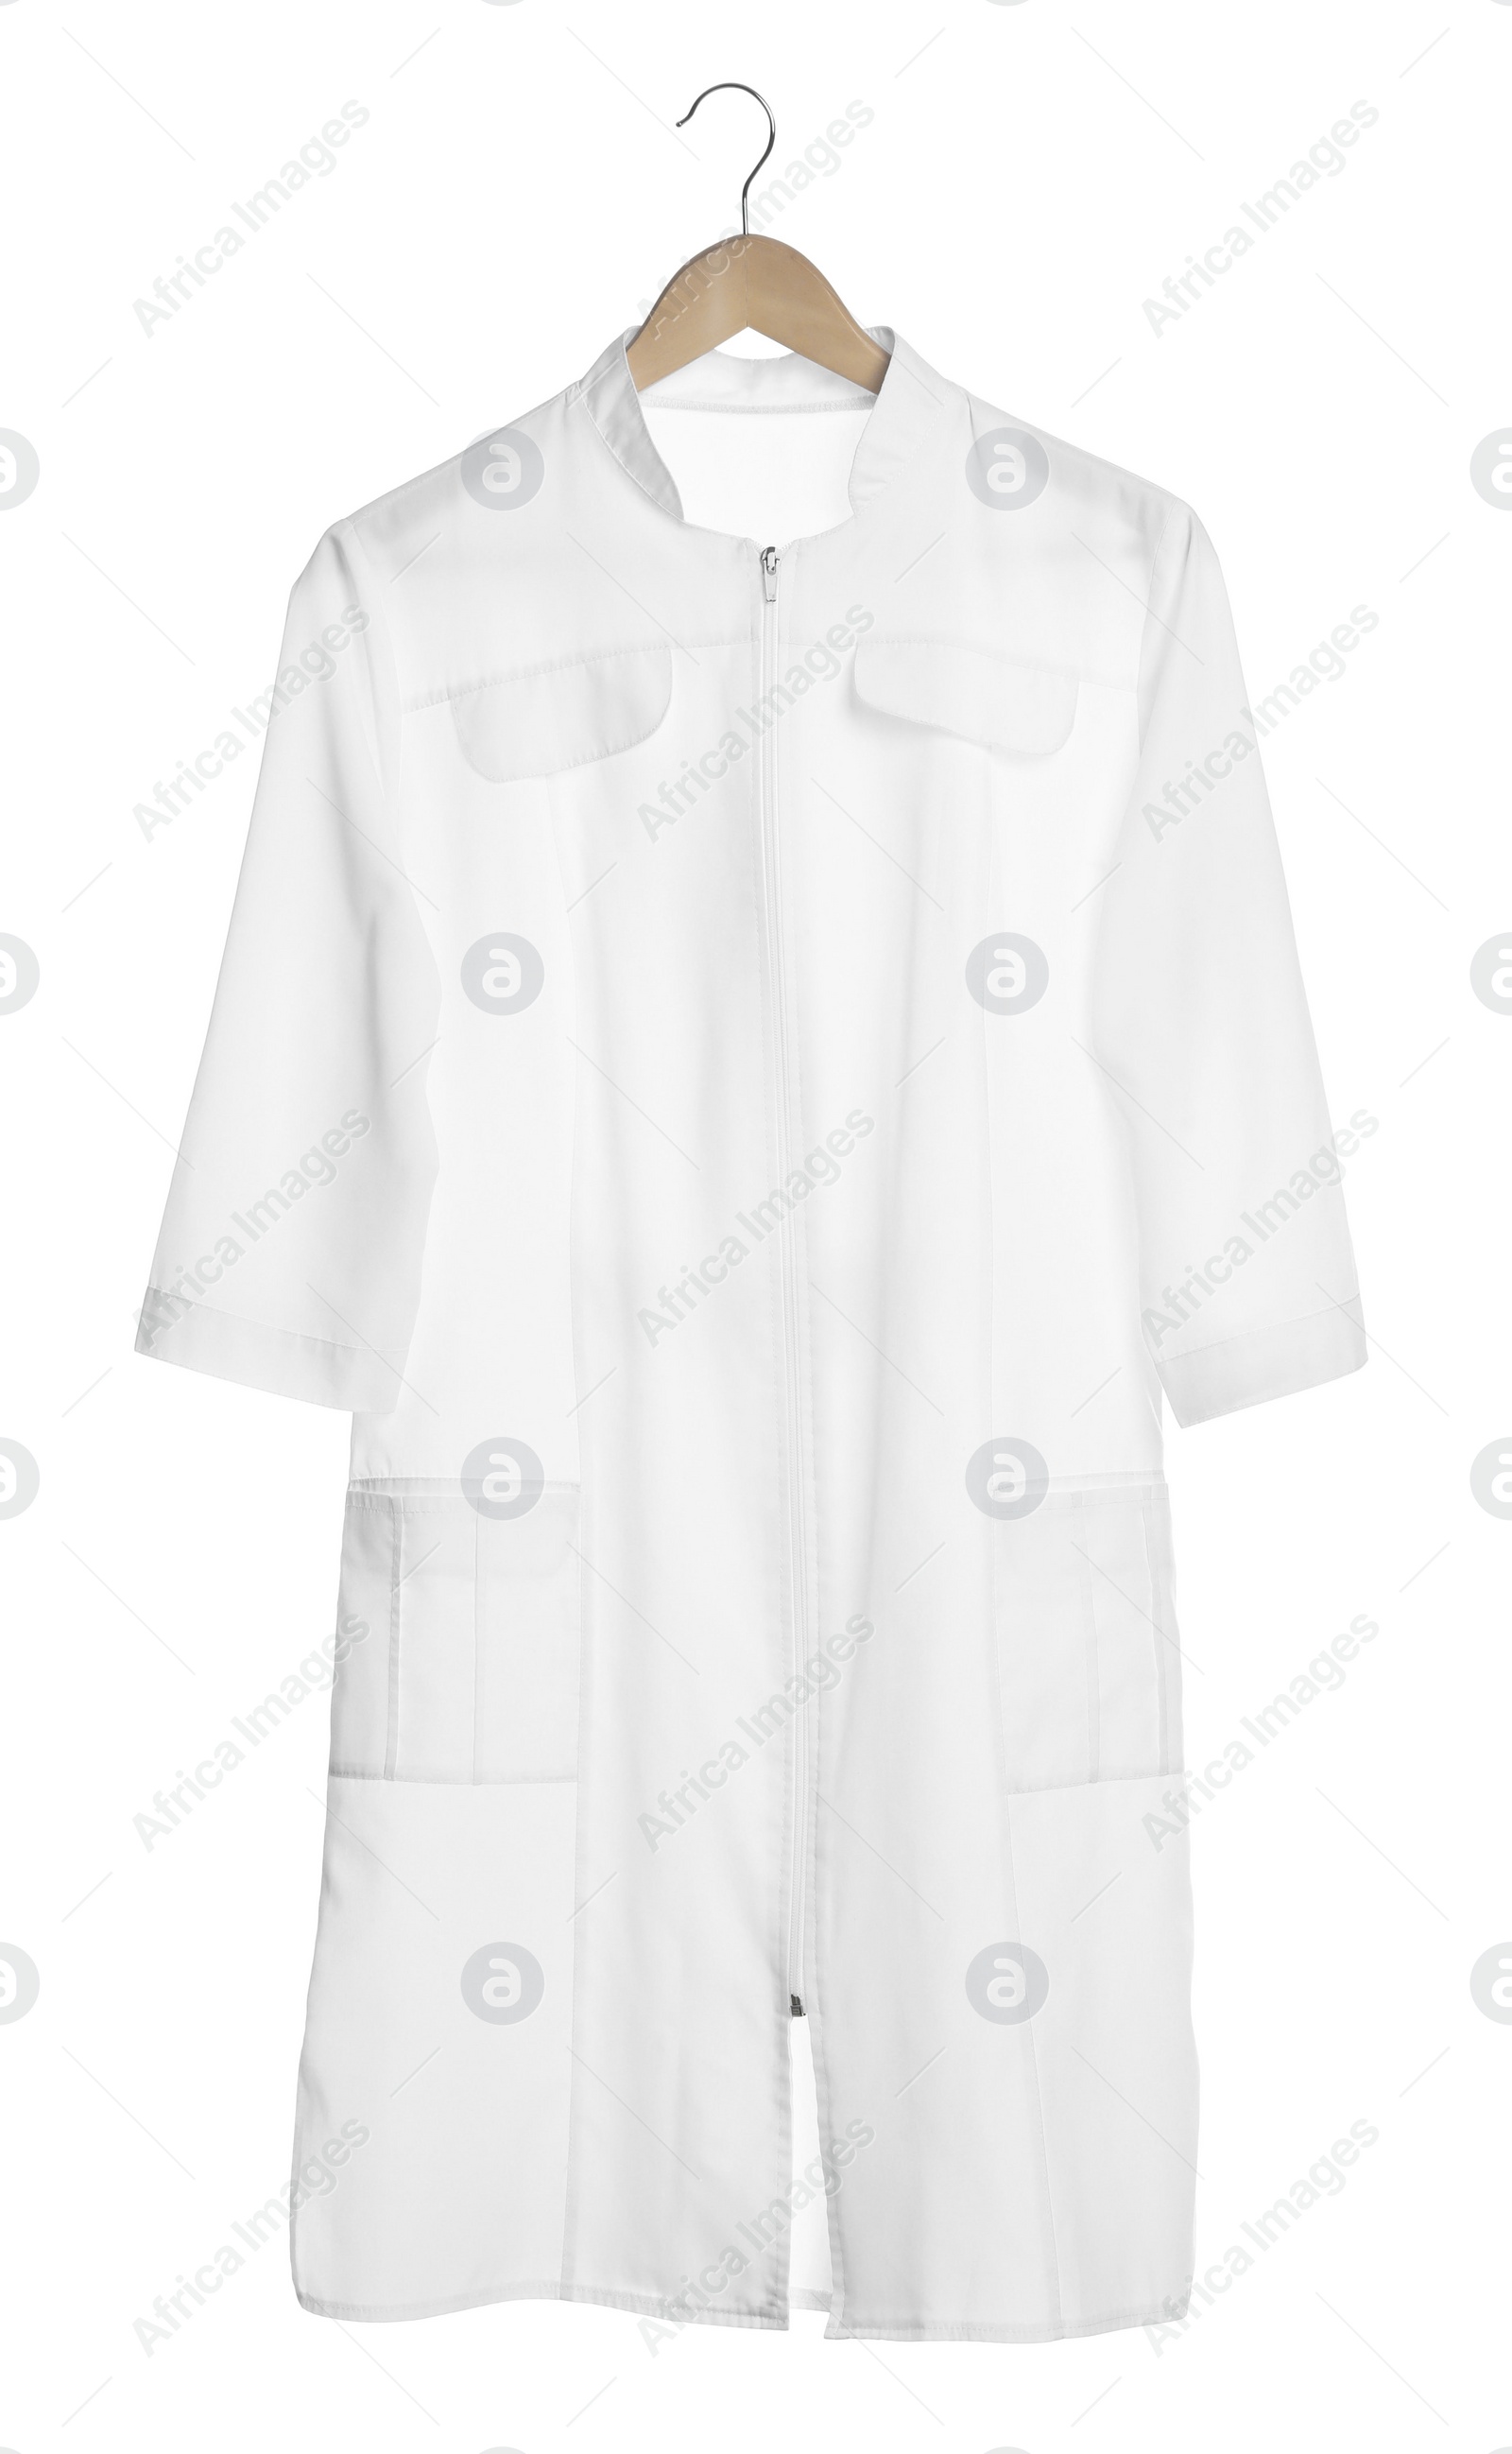 Photo of Doctor's gown isolated on white. Medical uniform